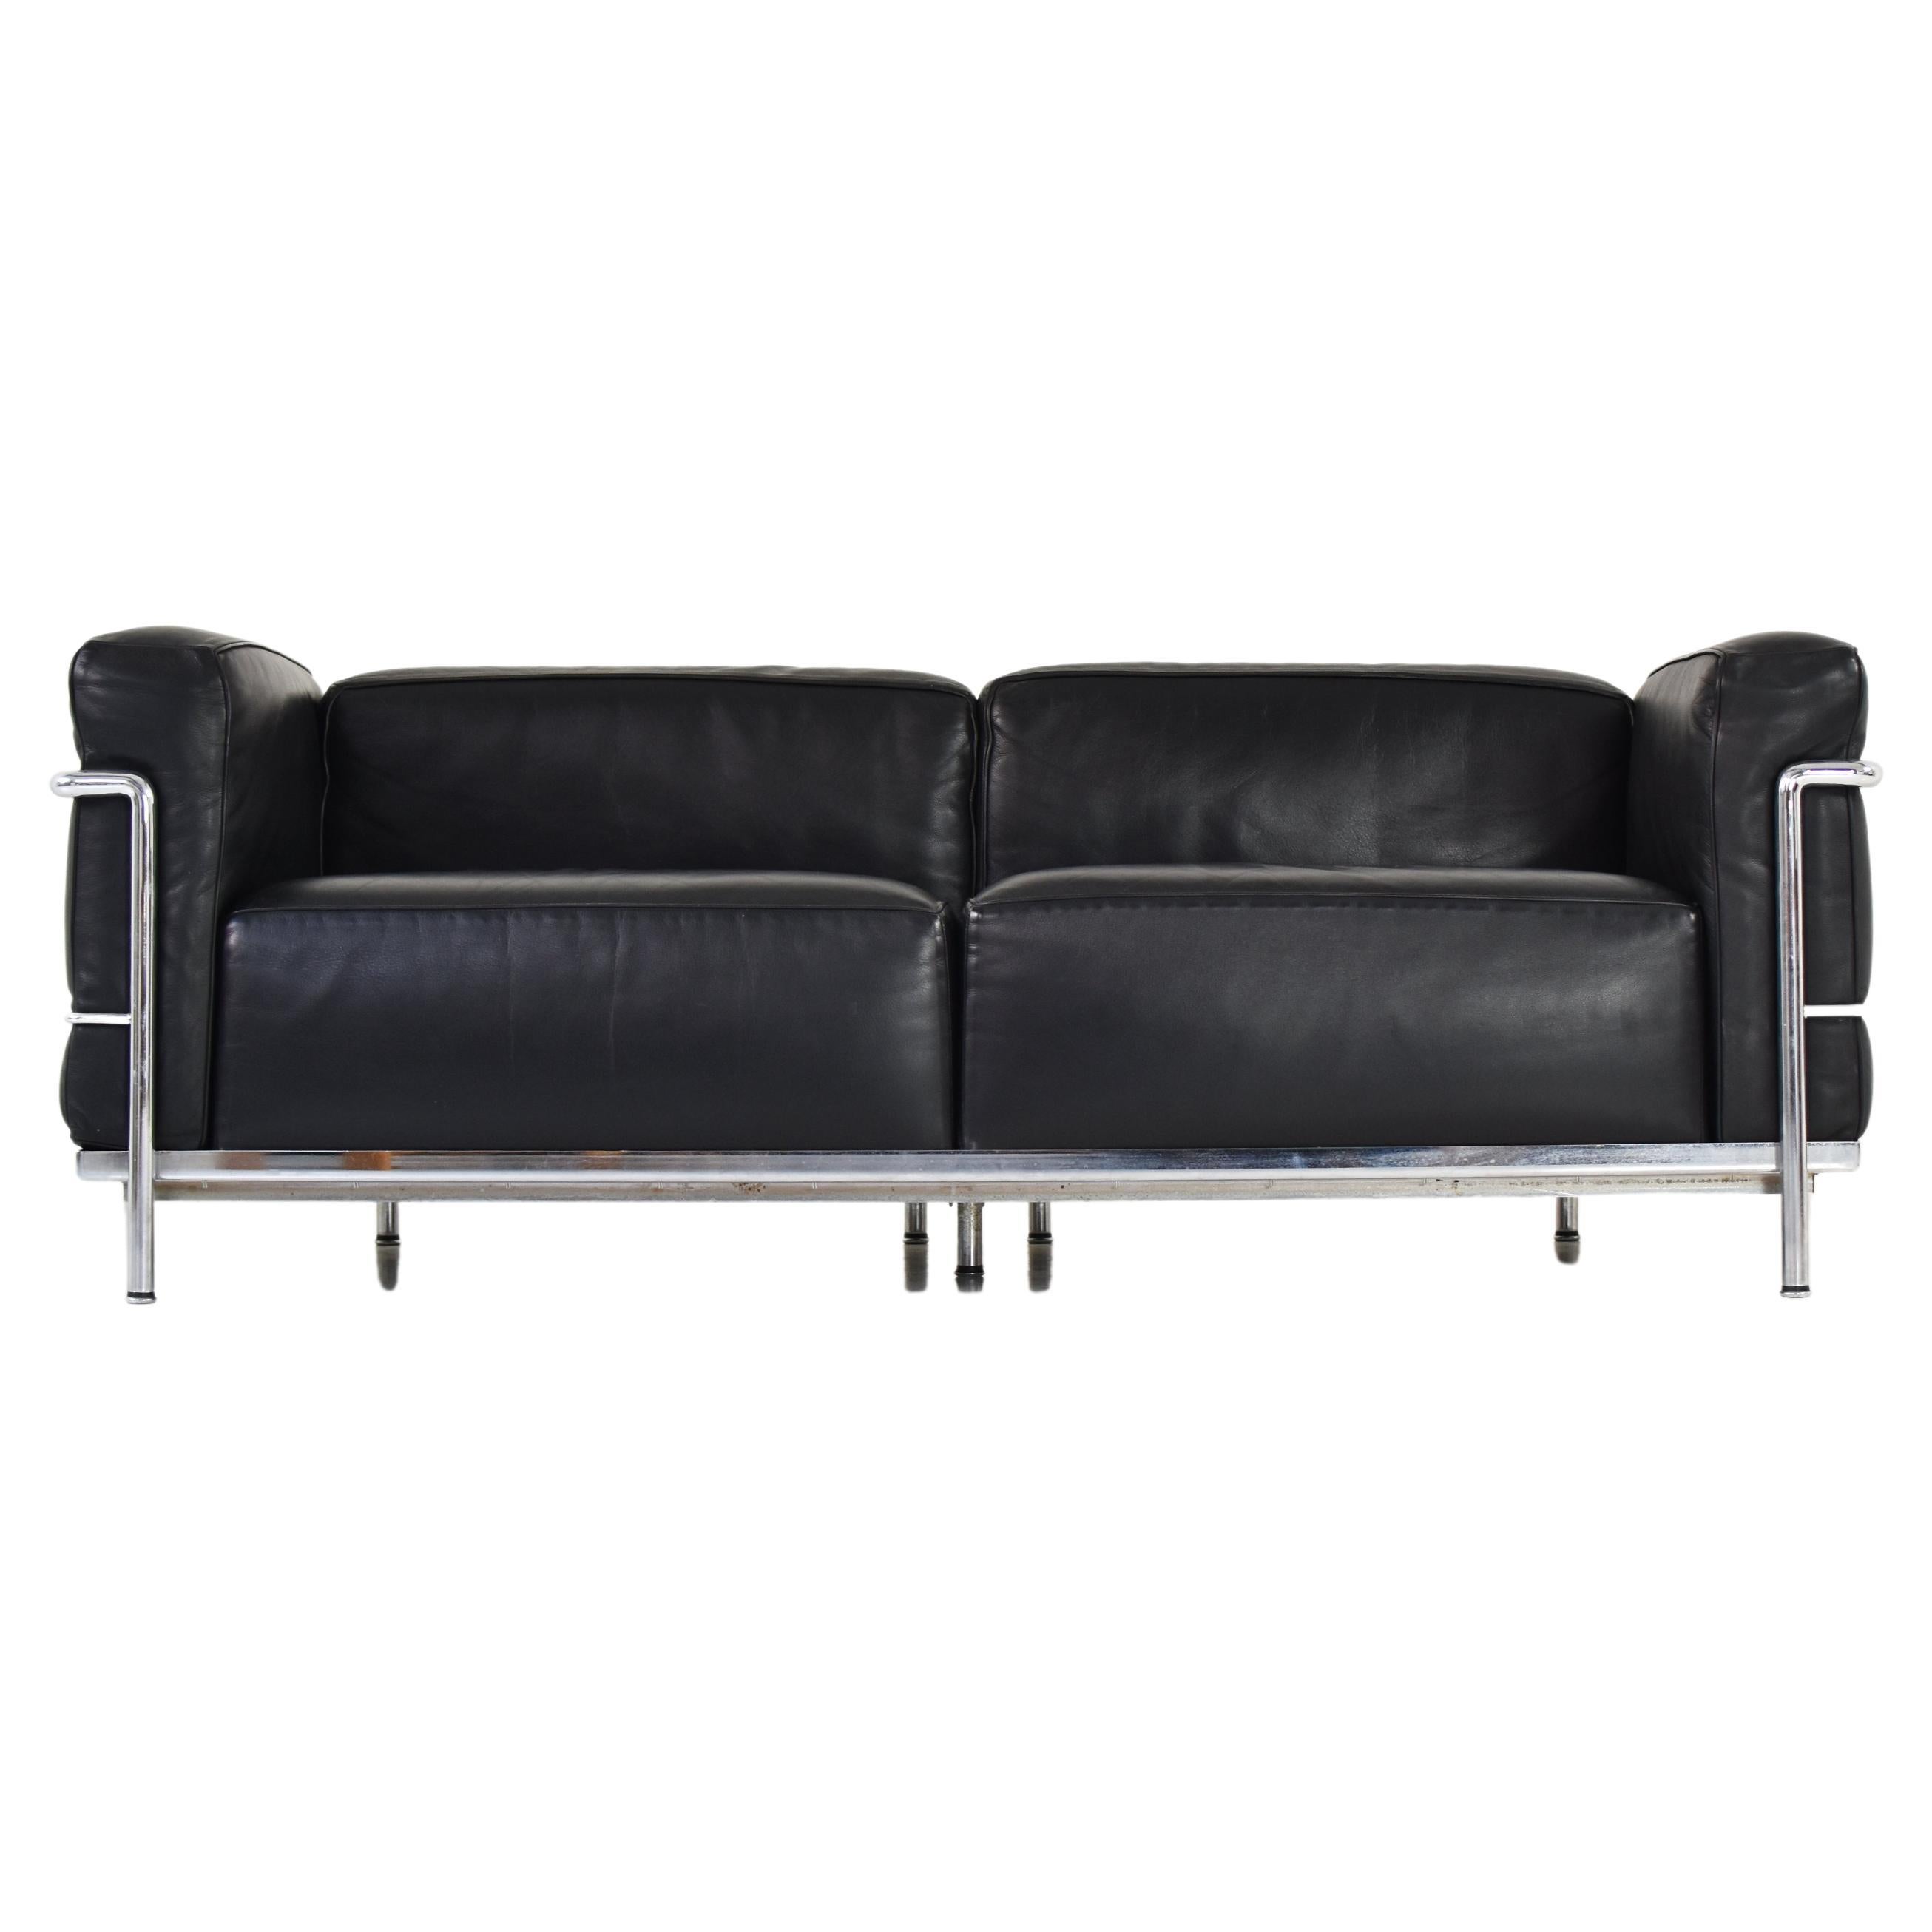 ‘Lc3’ Sofa by Le Corbusier, Pierre Jeanneret and Charlotte Perriand